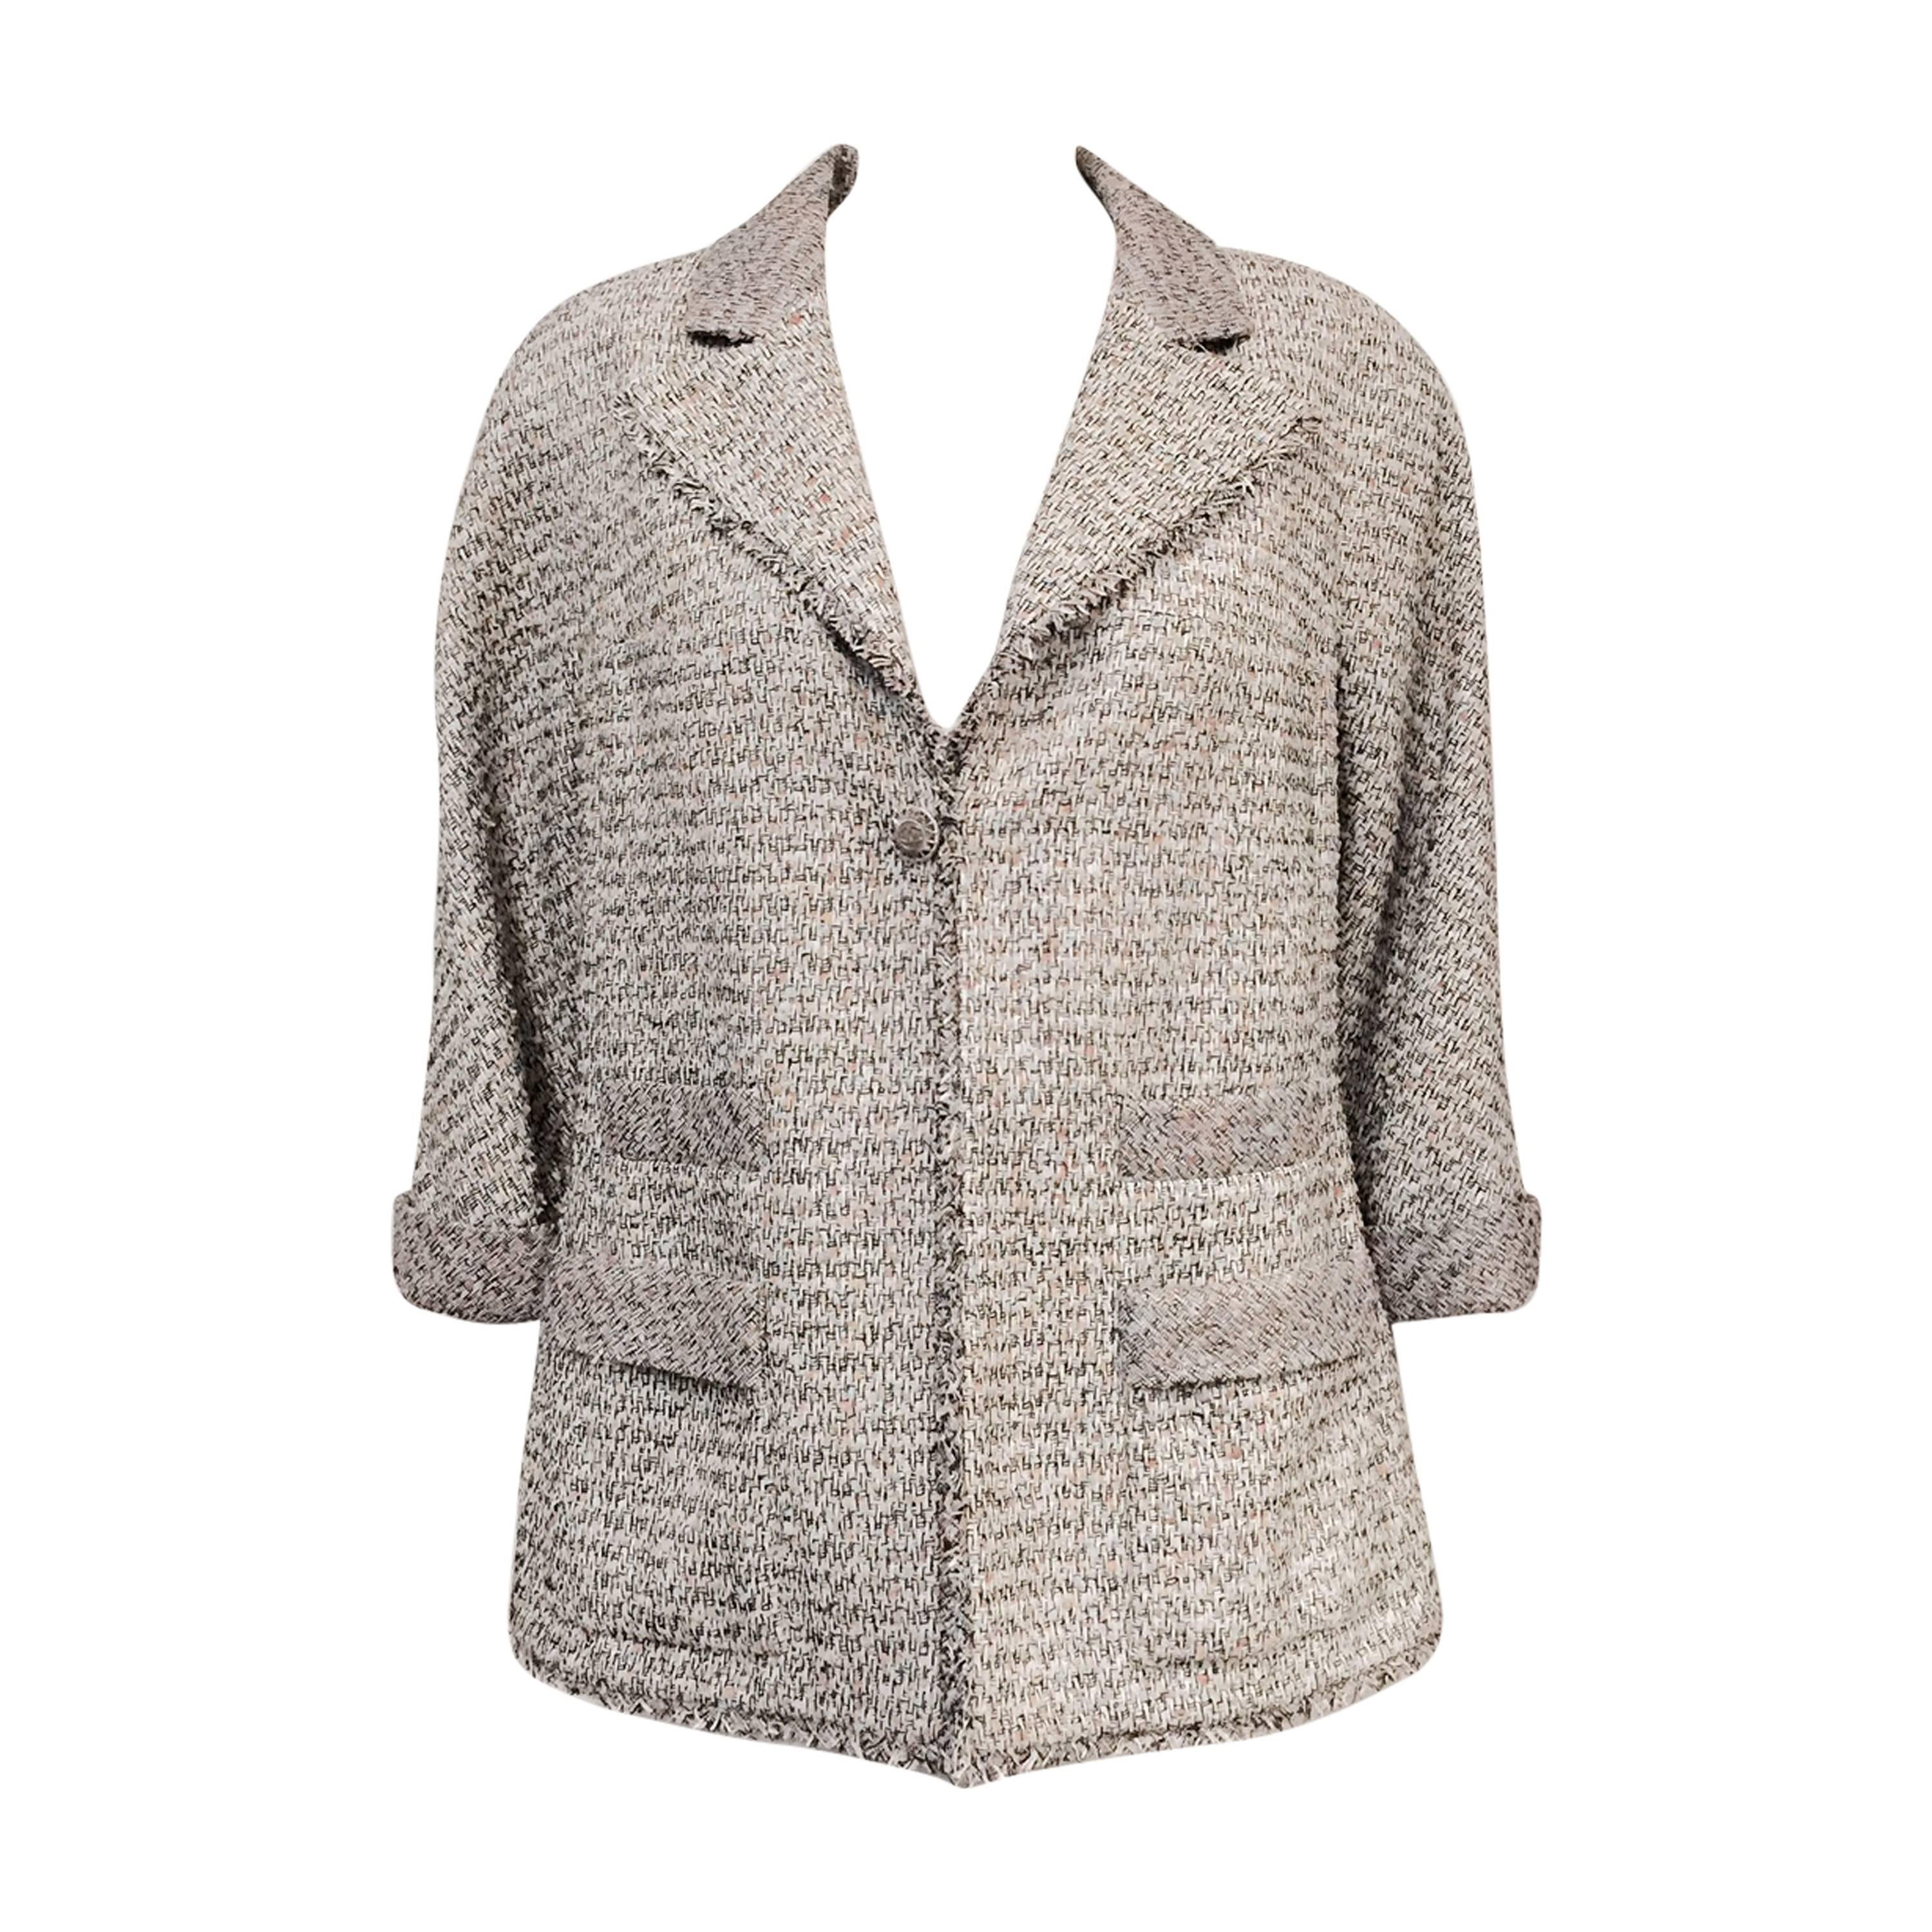 Chanel Spring Tweed Jacket With Rolled Cuffs and Frayed Hem